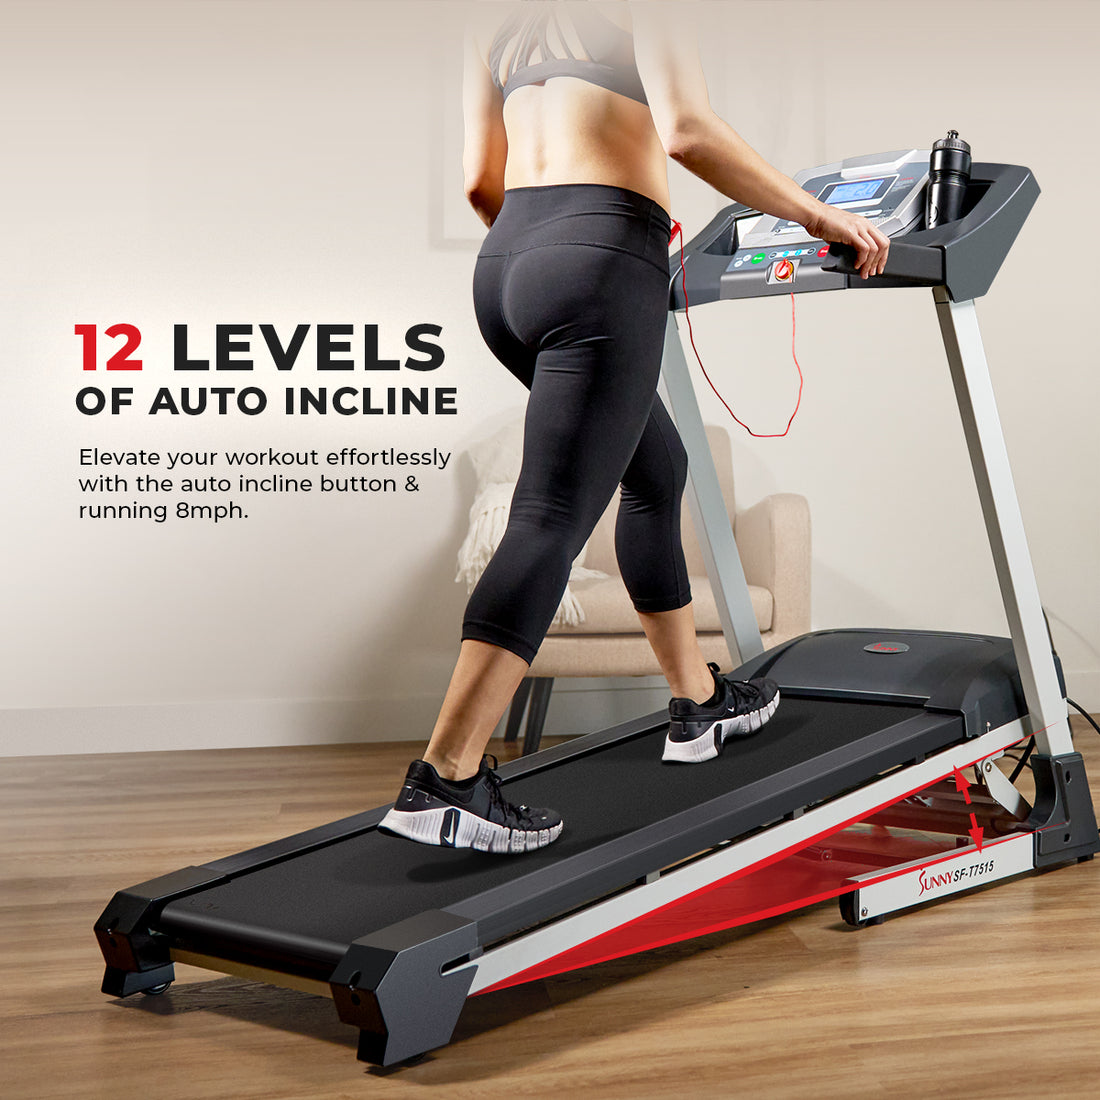 Sunny Health & Fitness Smart Running Treadmill w/ Auto Incline, Sound System, Bluetooth, Foldable, High Weight Capacity, SF-T7515 - image 3 of 10